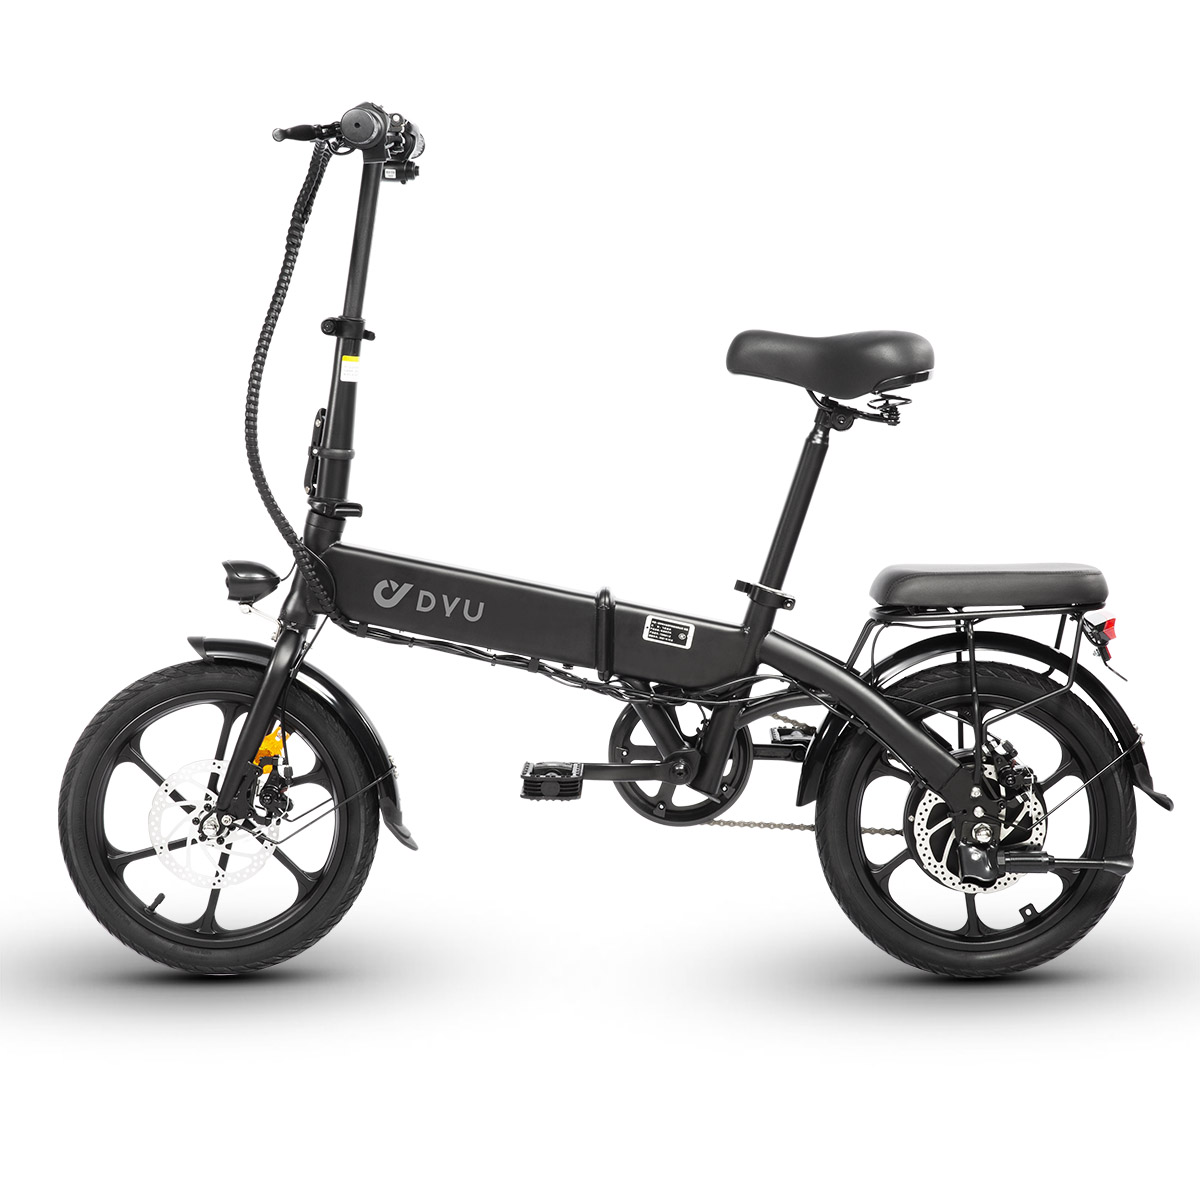 Find EU Direct DYU A1F 36V 250W 7 5AH 16inch Folding Electric Bicycle 25KM/H Speed 50 60KM Mileage Electric Bike for Sale on Gipsybee.com with cryptocurrencies